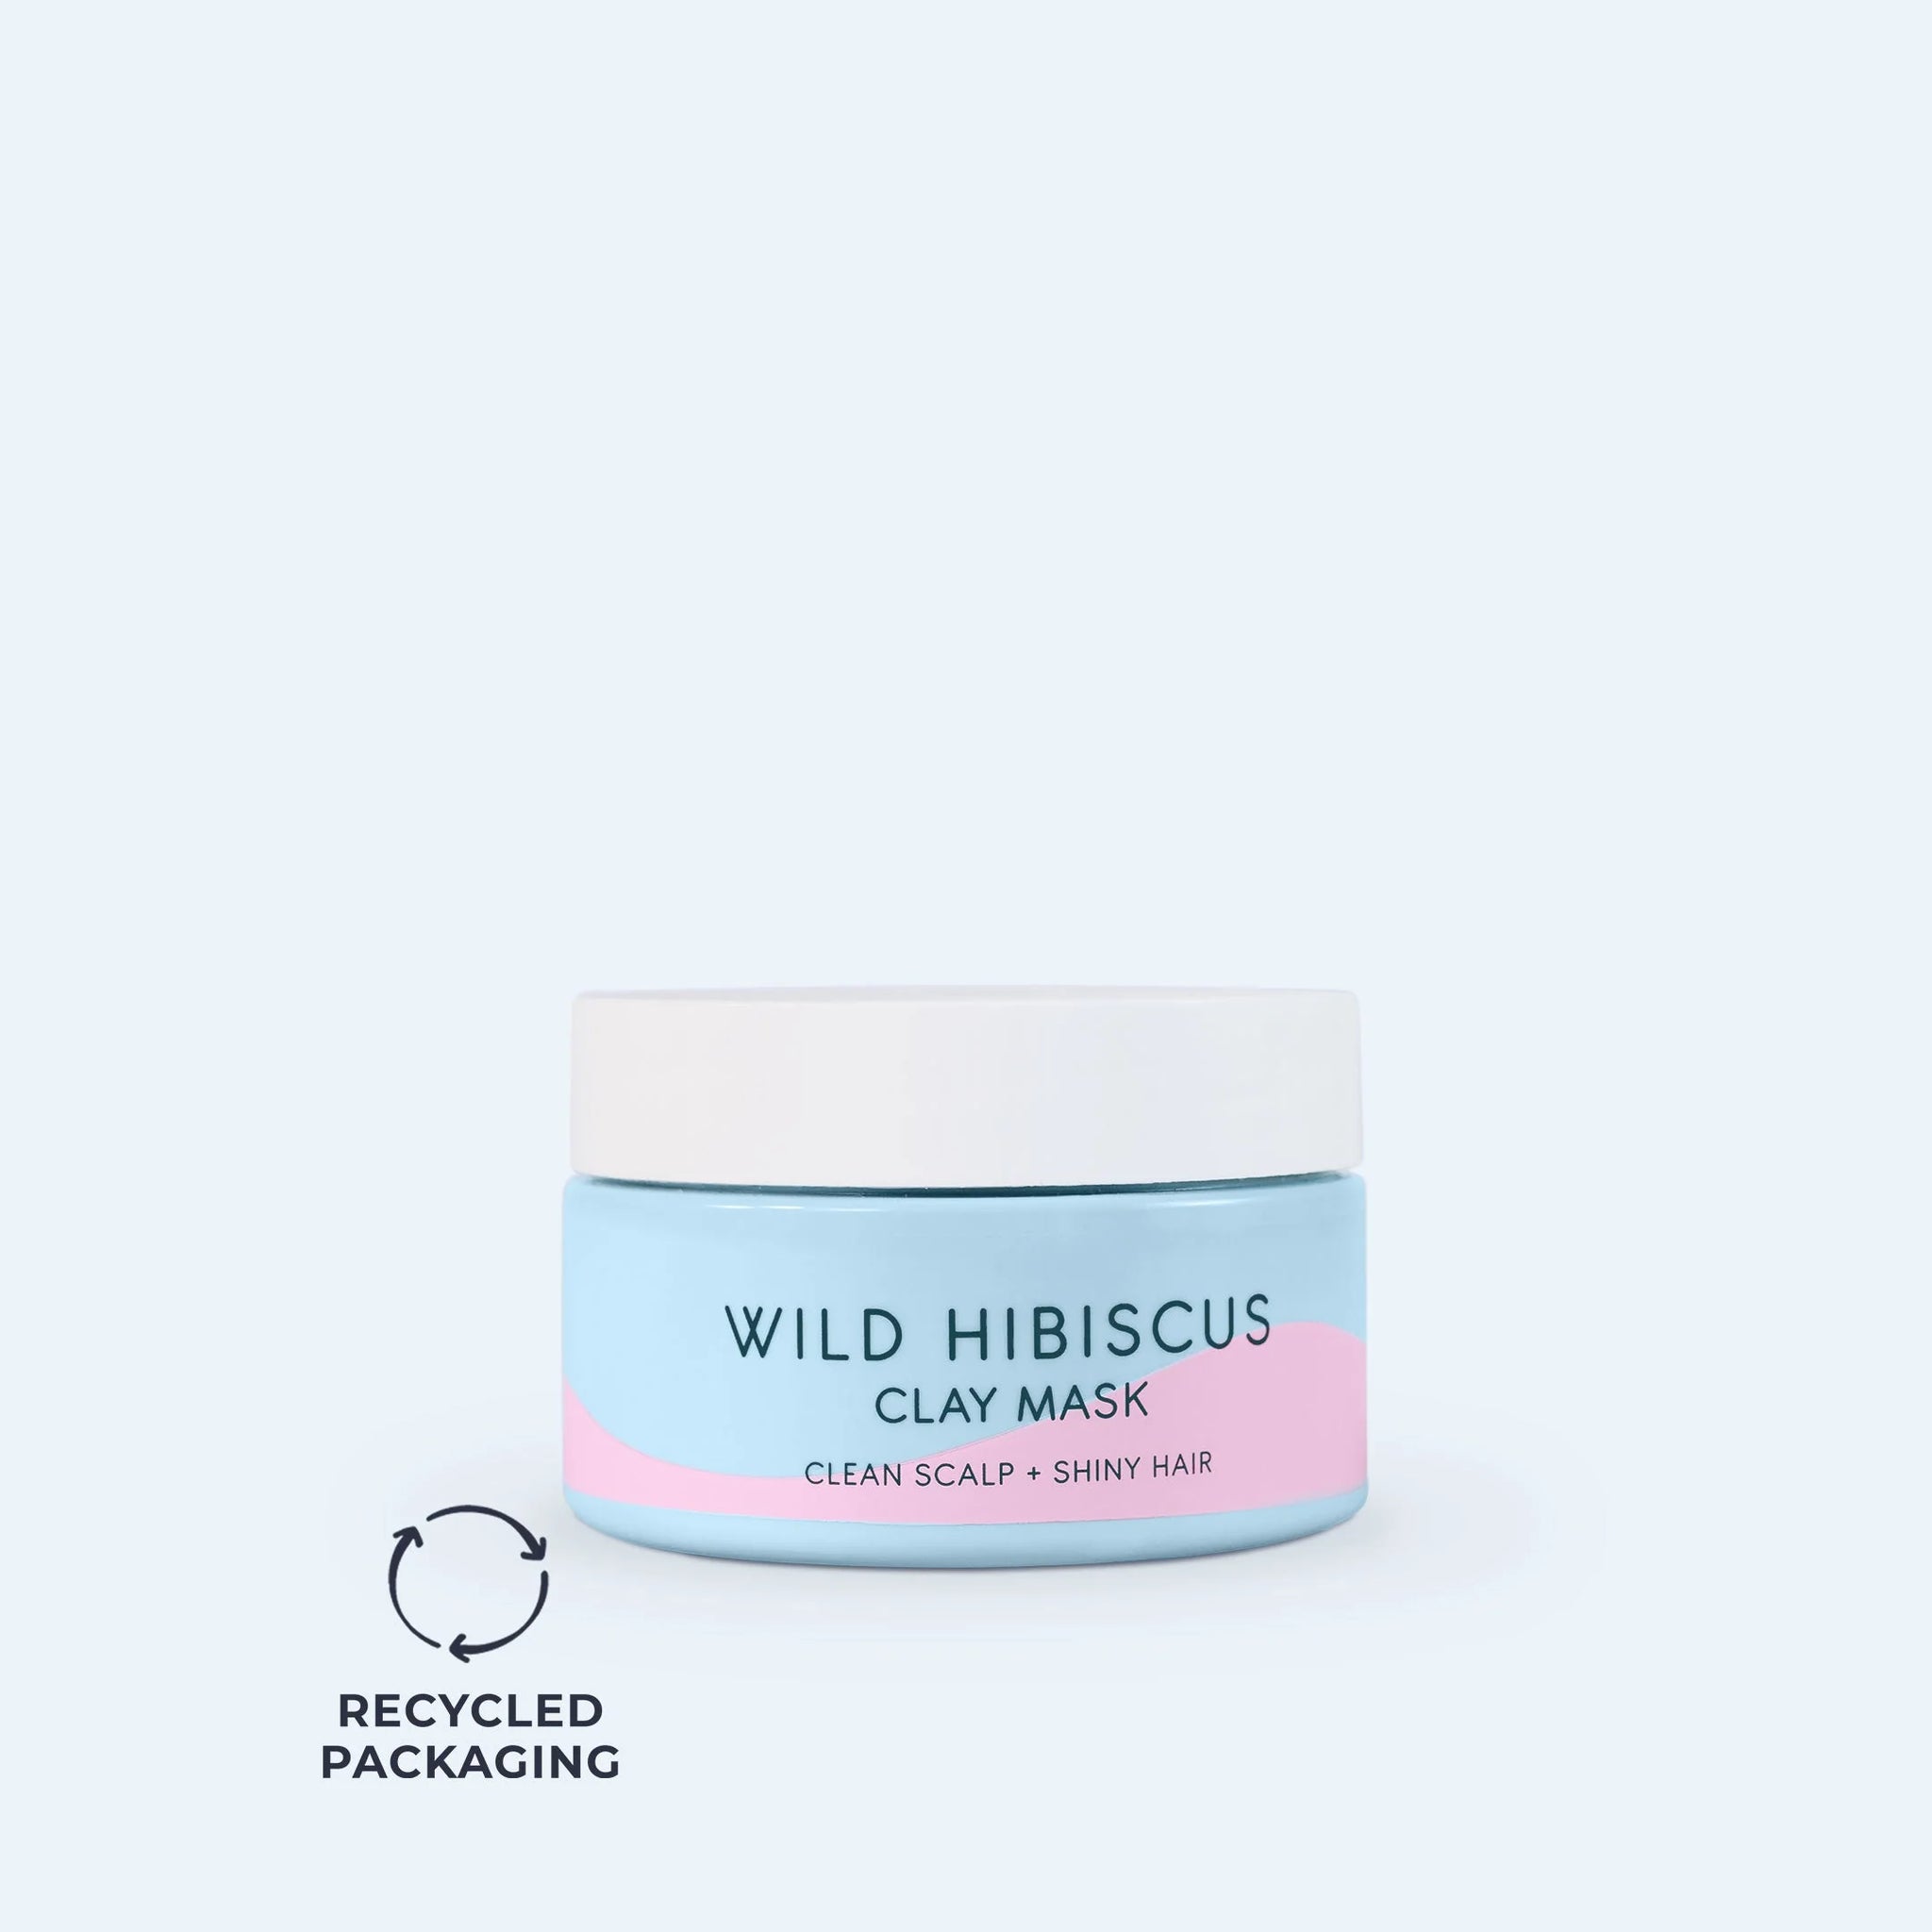 The Wild Hibiscus Clay Mask